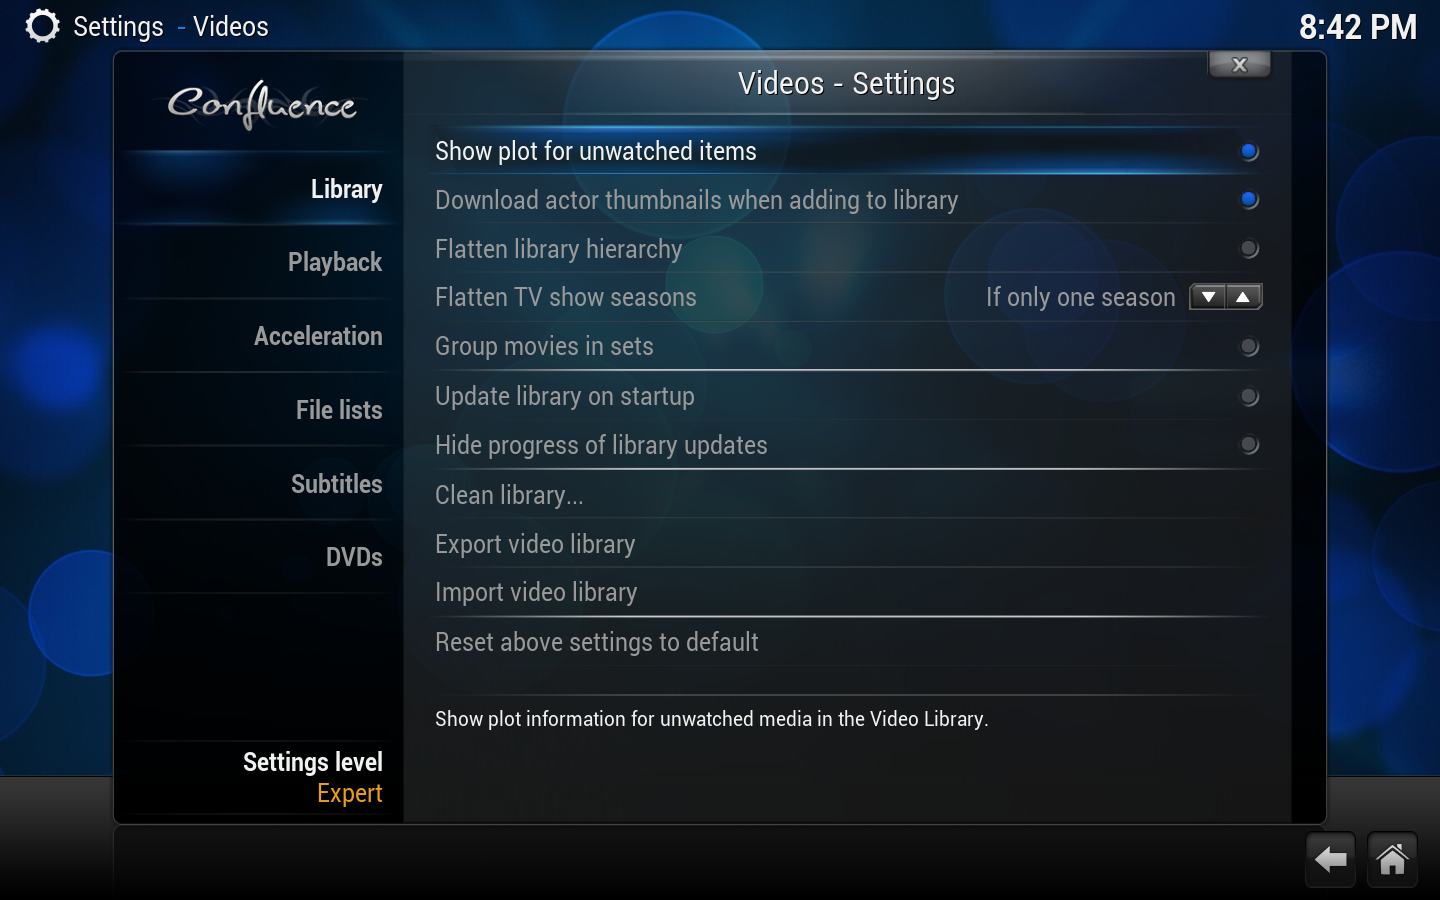 File:Settings.videos.library.png